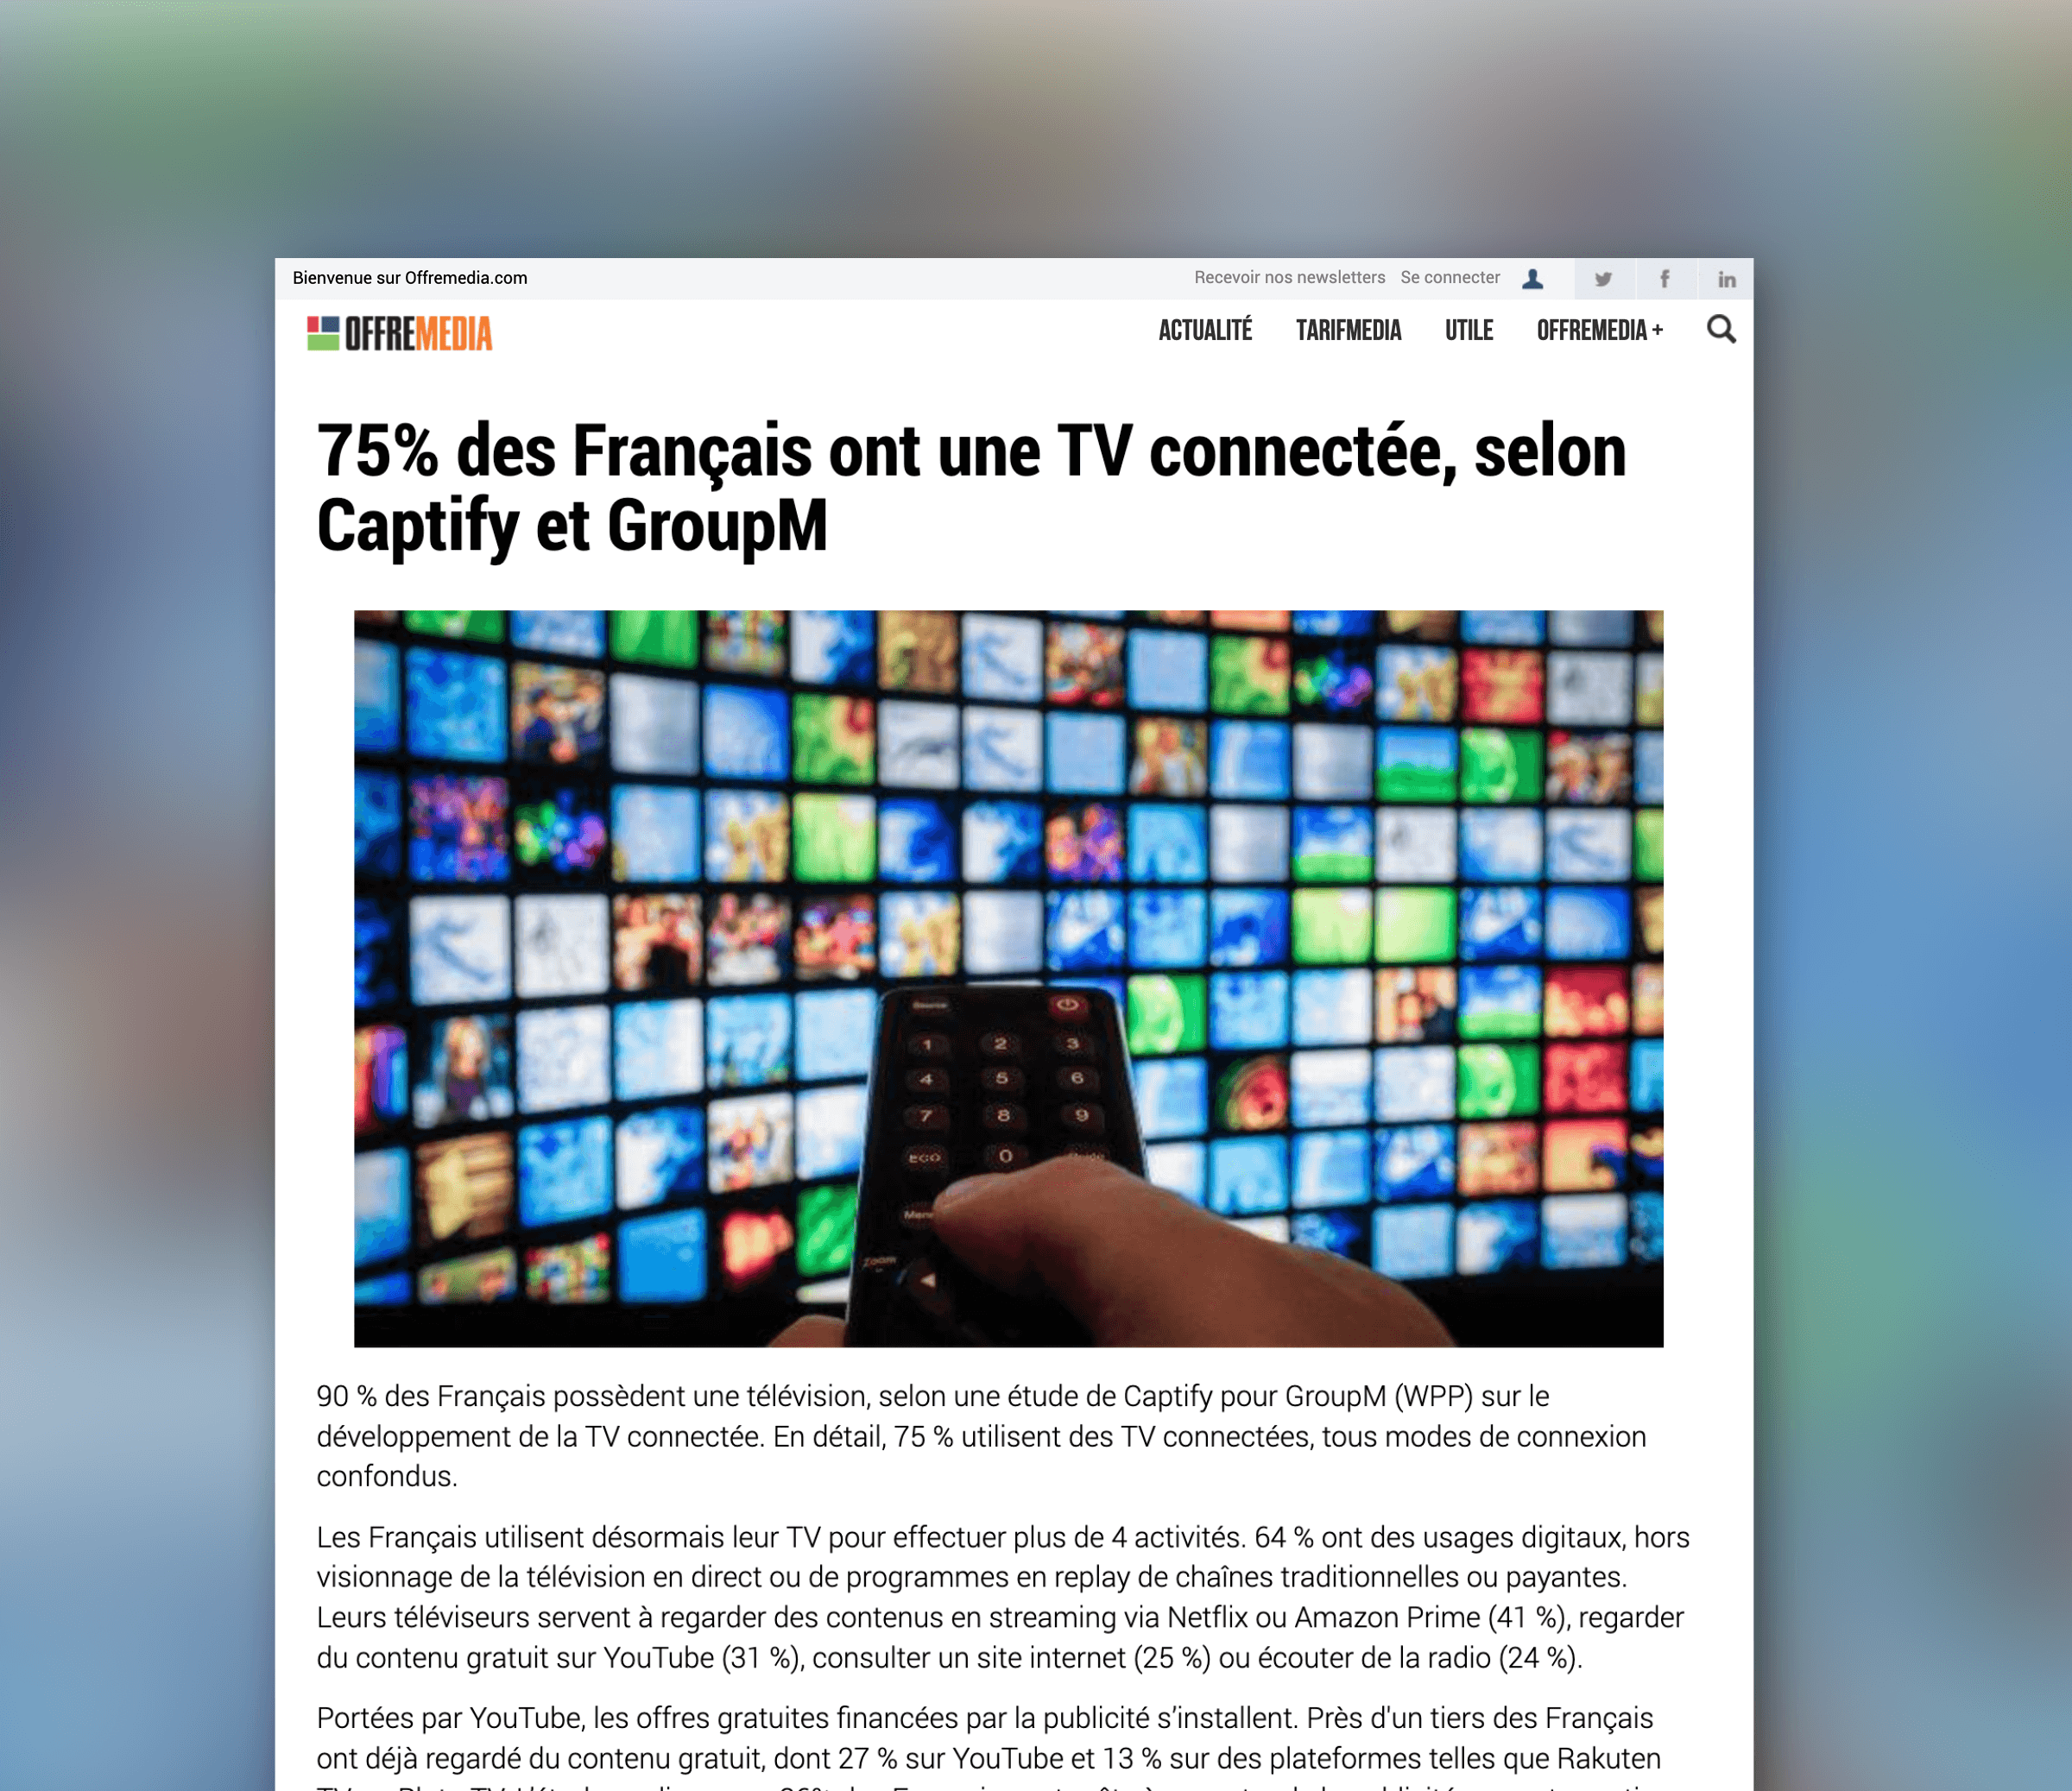 Offre Media: 75% of French People Have a Connected TV, according to research from GroupM and Captify